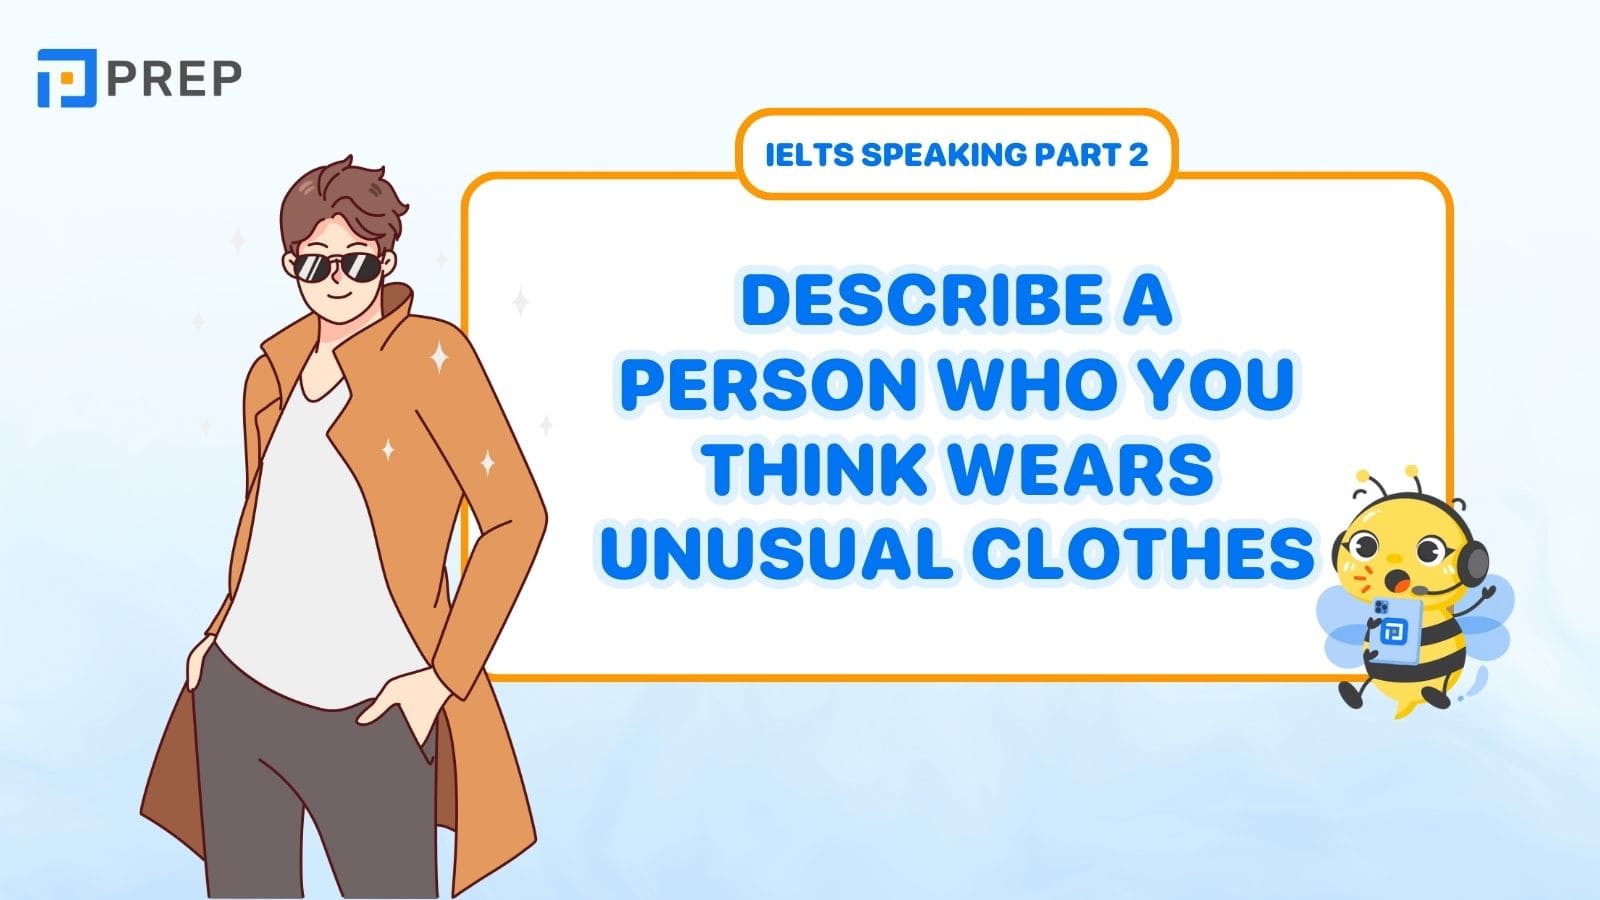 Describe a person who you think wears unusual clothes